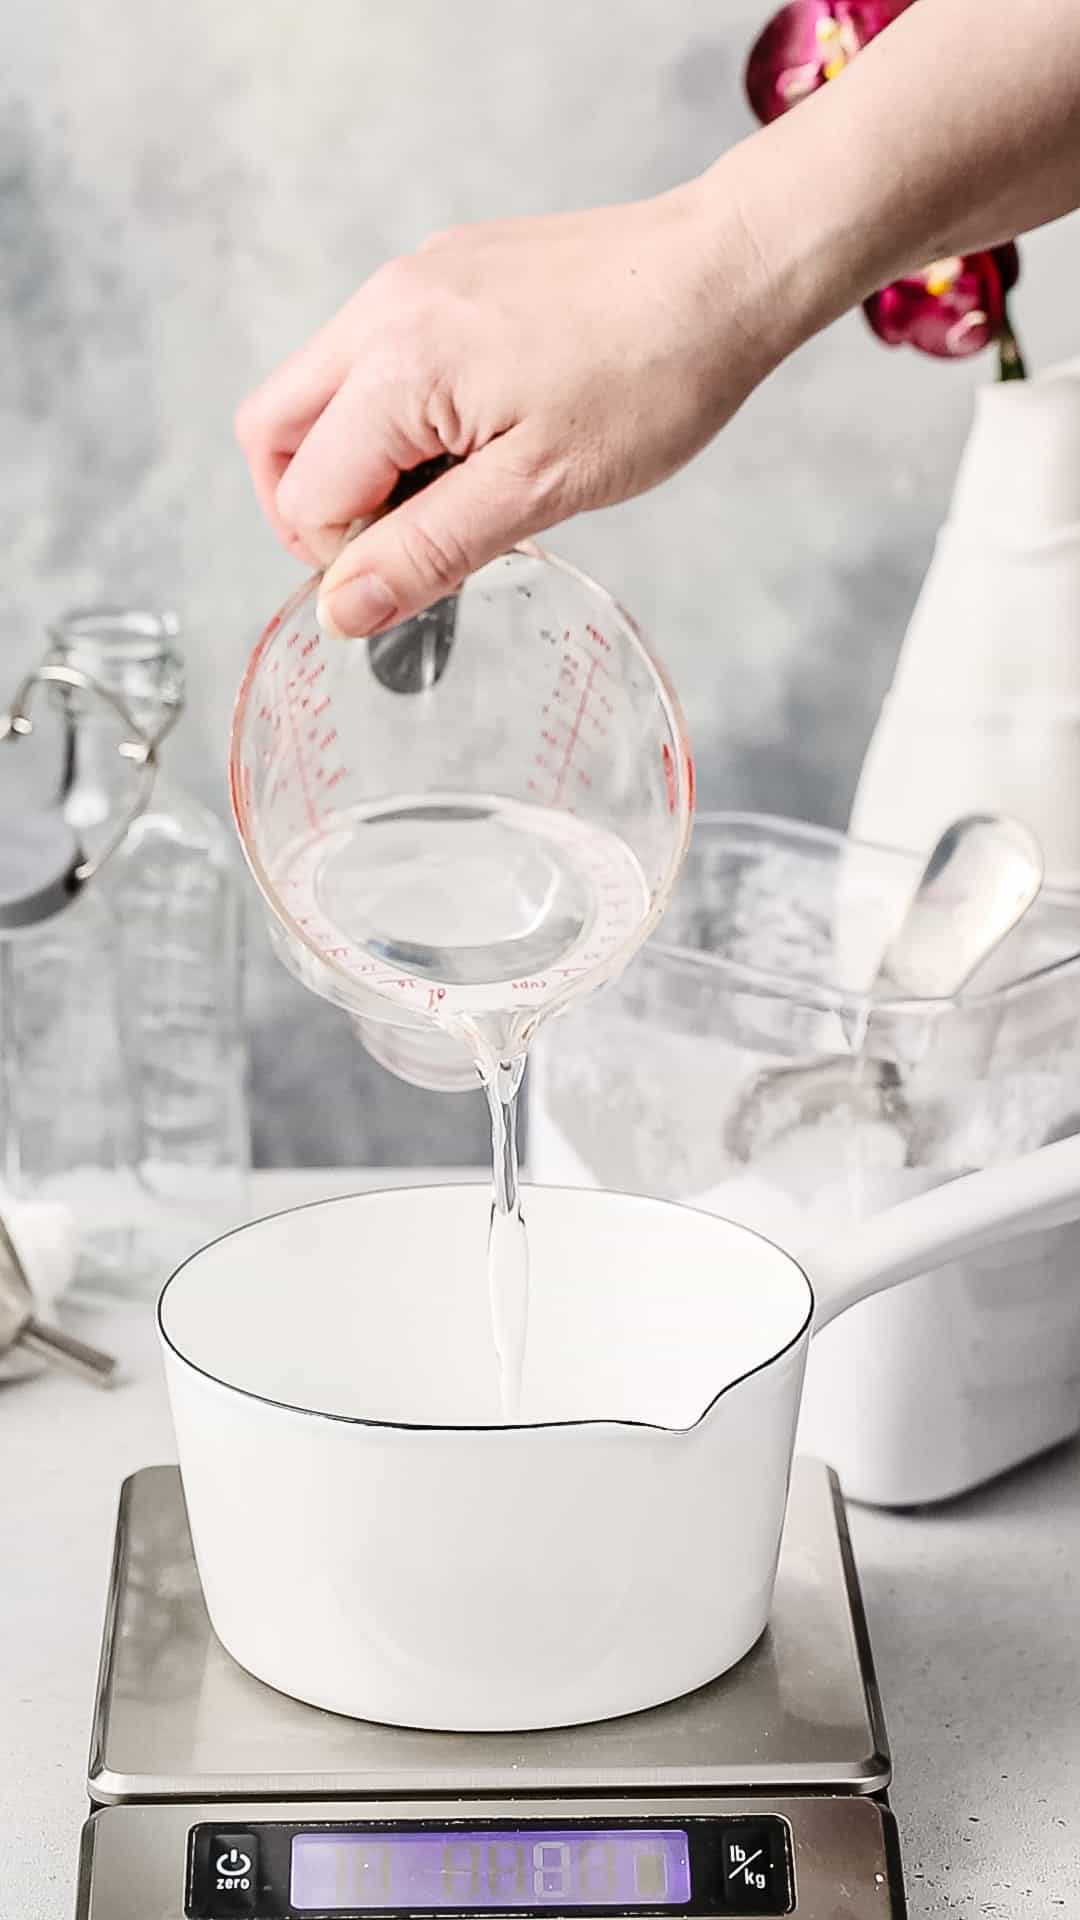 Hand pouring water from a measuring cup into a saucepan.